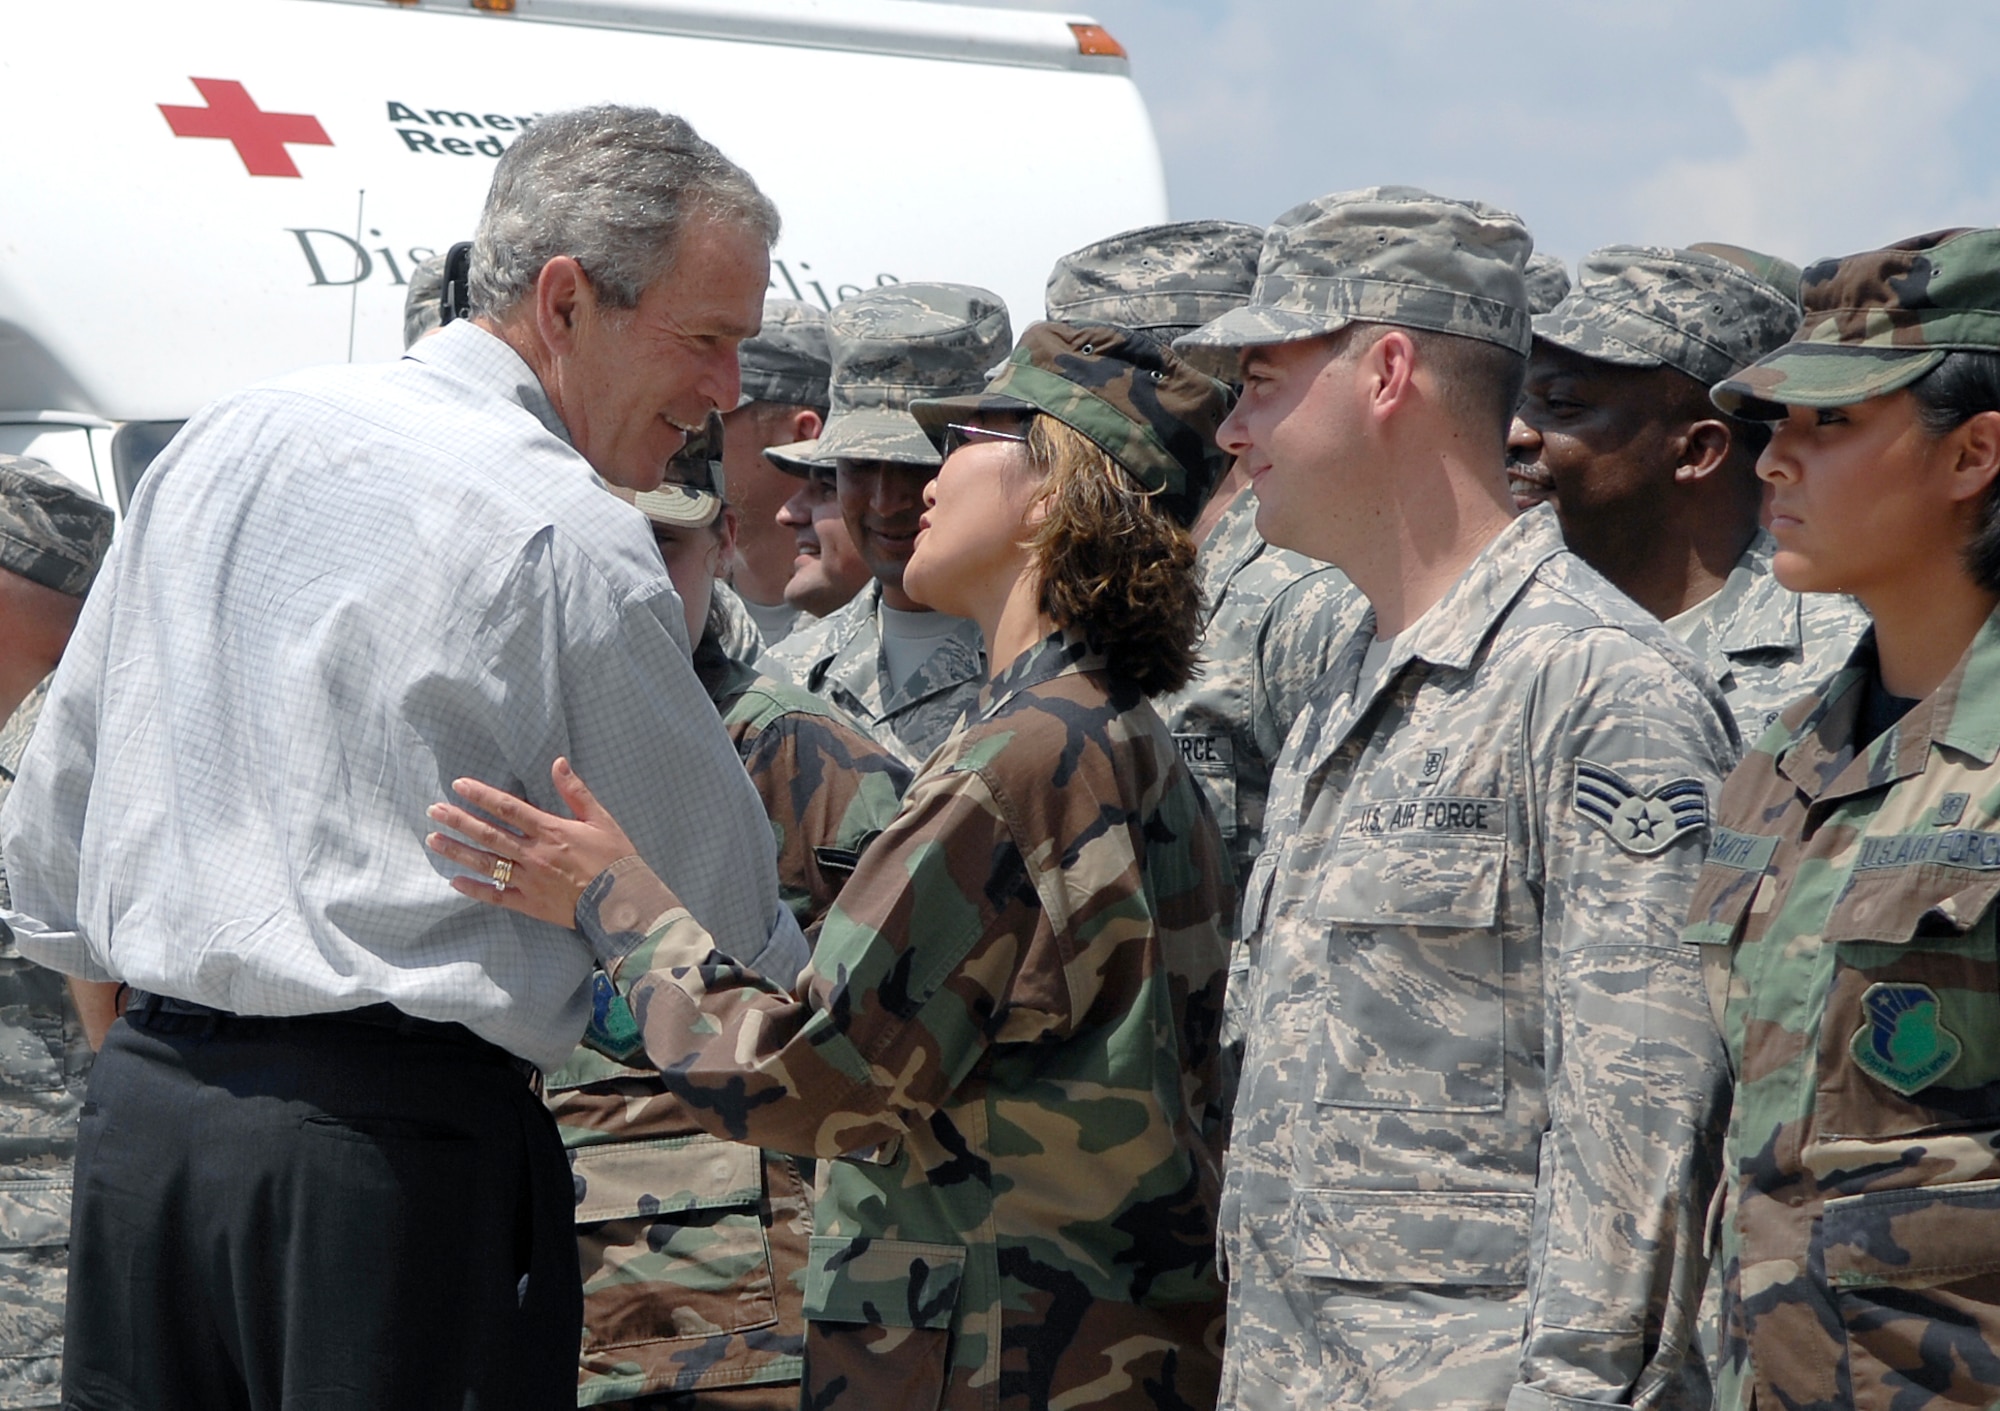 President George W. Bush personally thanks Airman of the Texas Air National Guard 149th Fighter Wing and the 59th Medical Wing for their volunteer efforts in processing over 700 evacuees displaced due to Hurricane Gustav Sept.1 at Port San Antonio, Texas. 
(U.S. Air Force photo/Staff Sgt. Bennie J. Davis III)